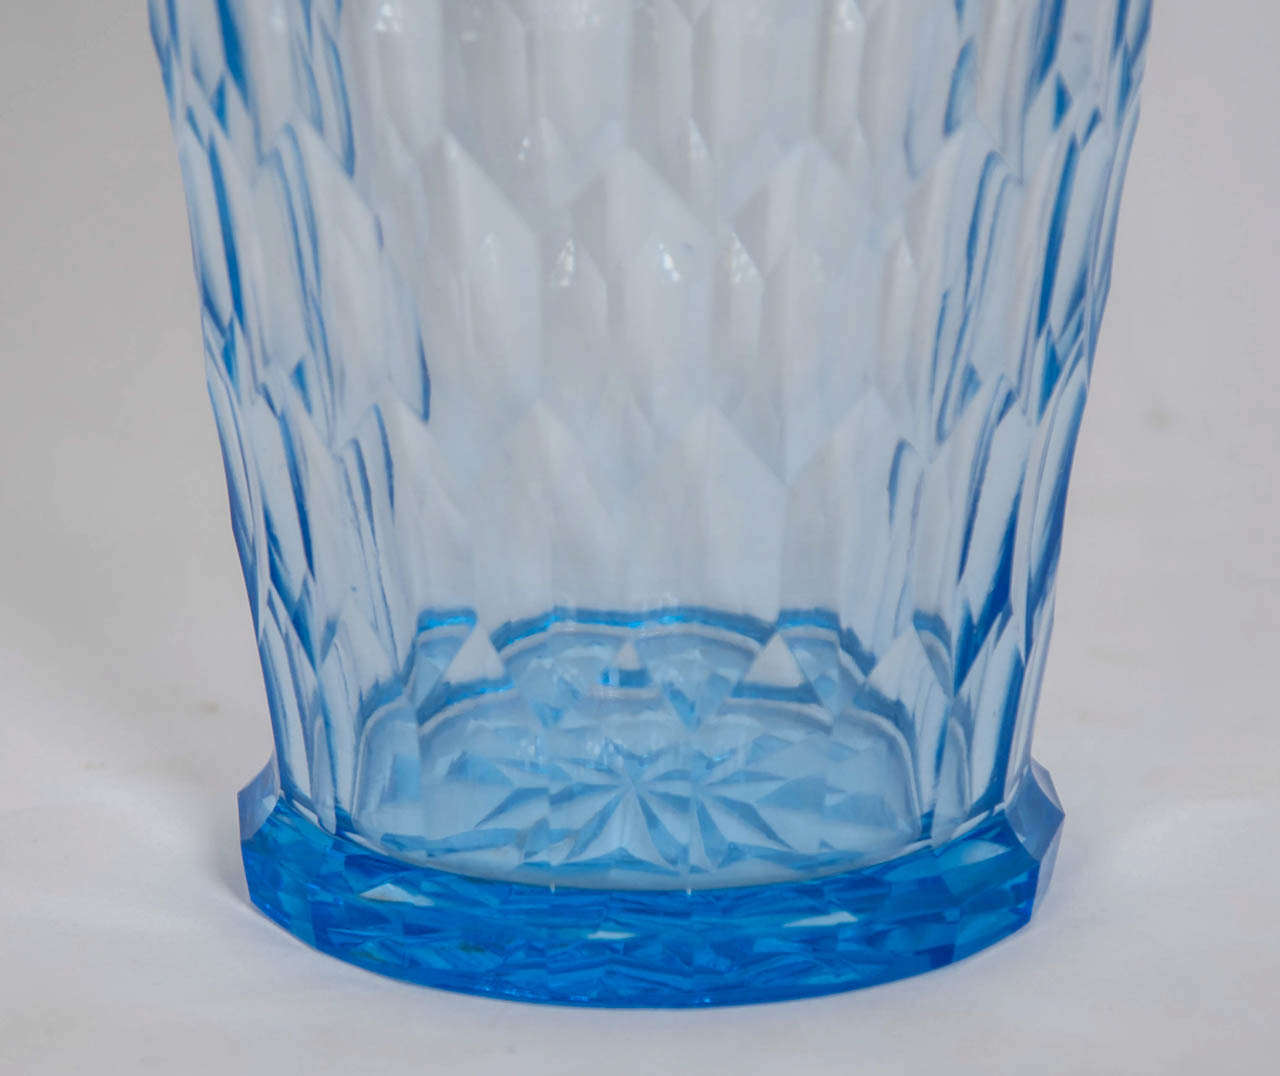 1920s Cut Glass Vase and Cover Designed by Edward Hald for Orrefors In Excellent Condition For Sale In Stratford Upon Avon, GB